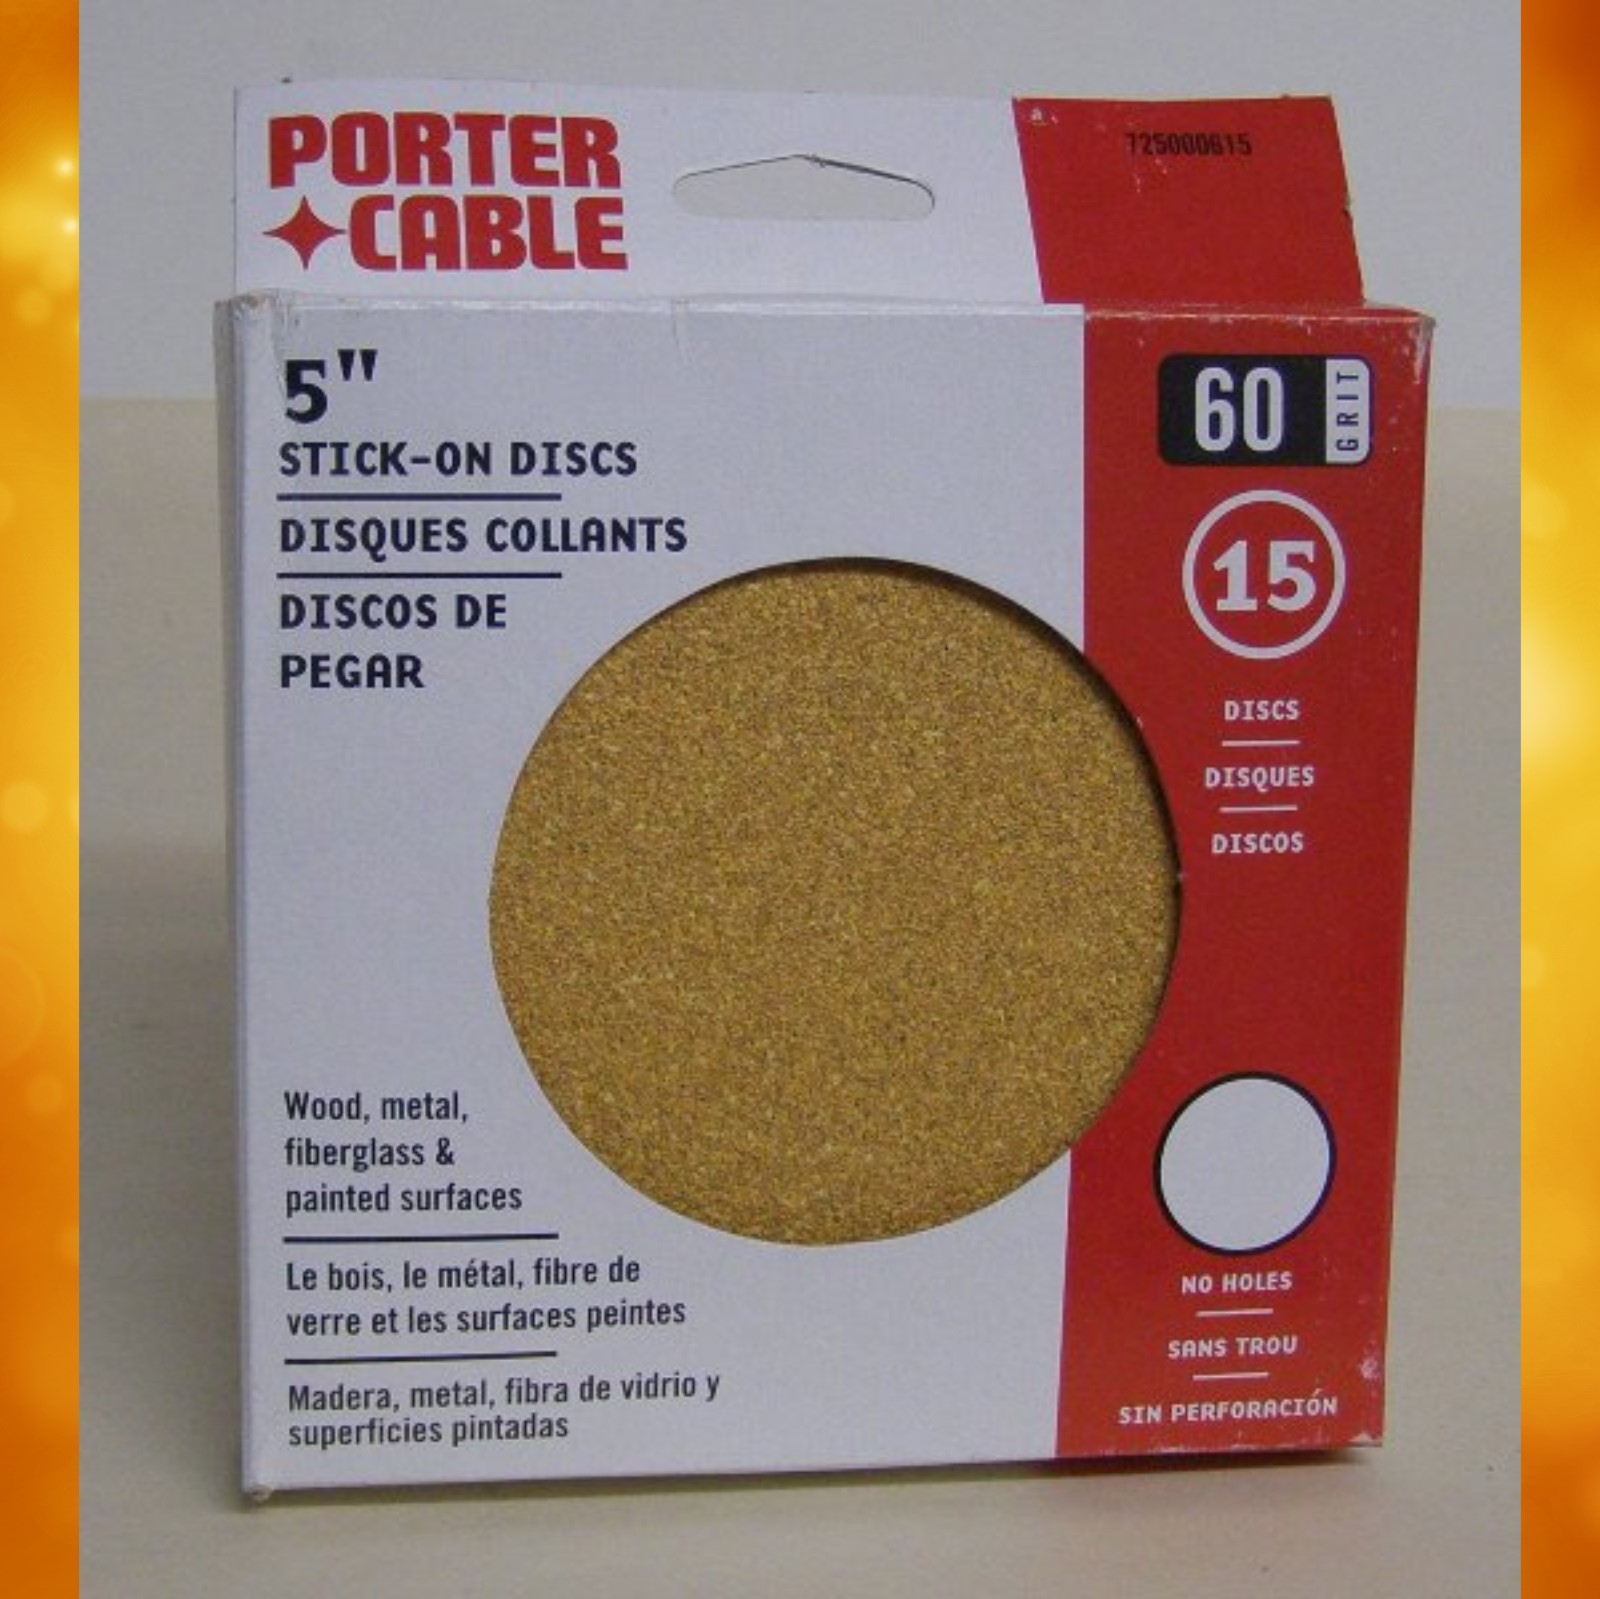 Porter-Cable 5" No-Hole, Adhesive-Backed Sanding Discs - 60 Grit (15 Pack) 725000615